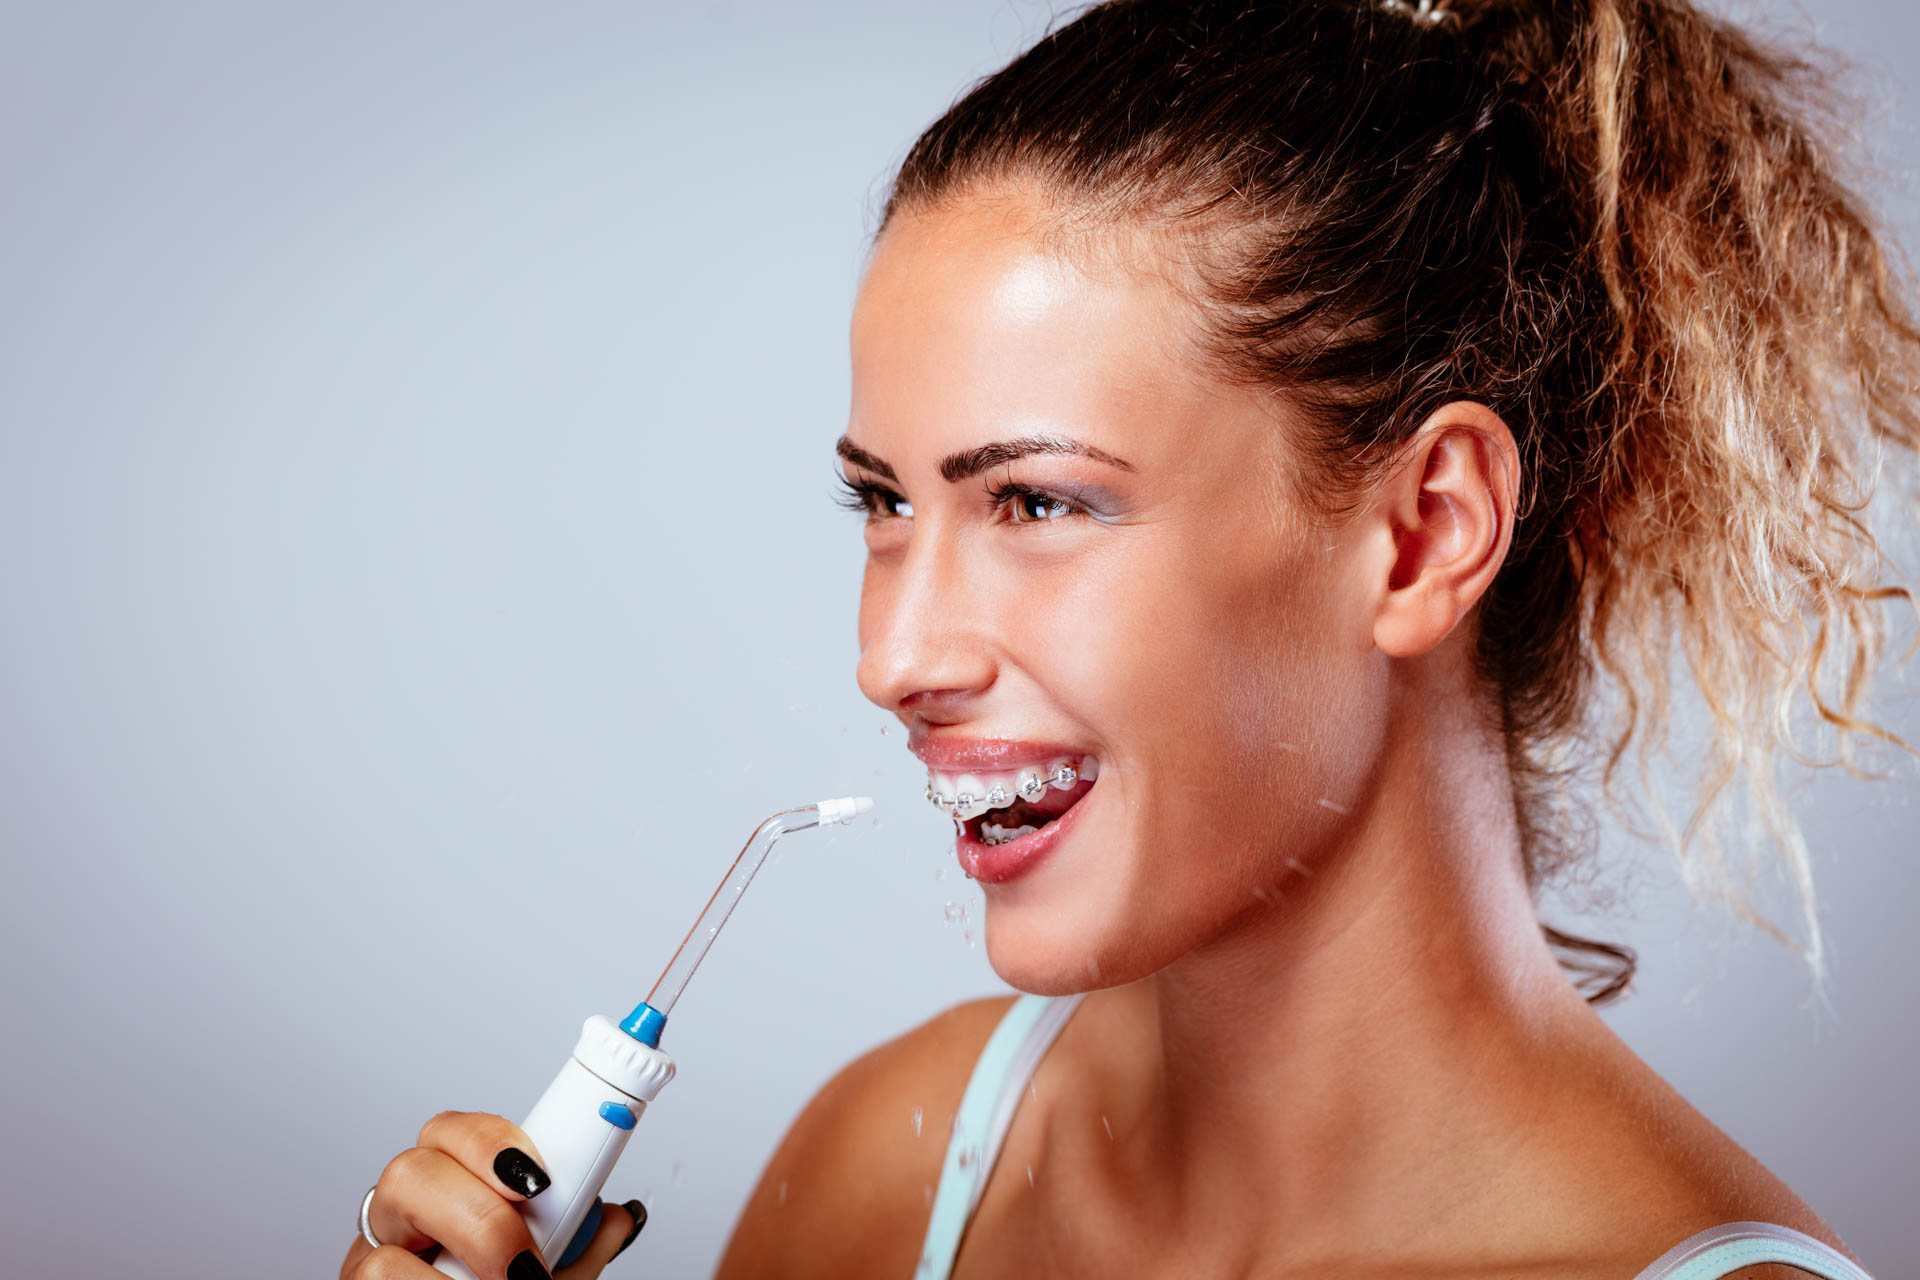 Tips for Flossing